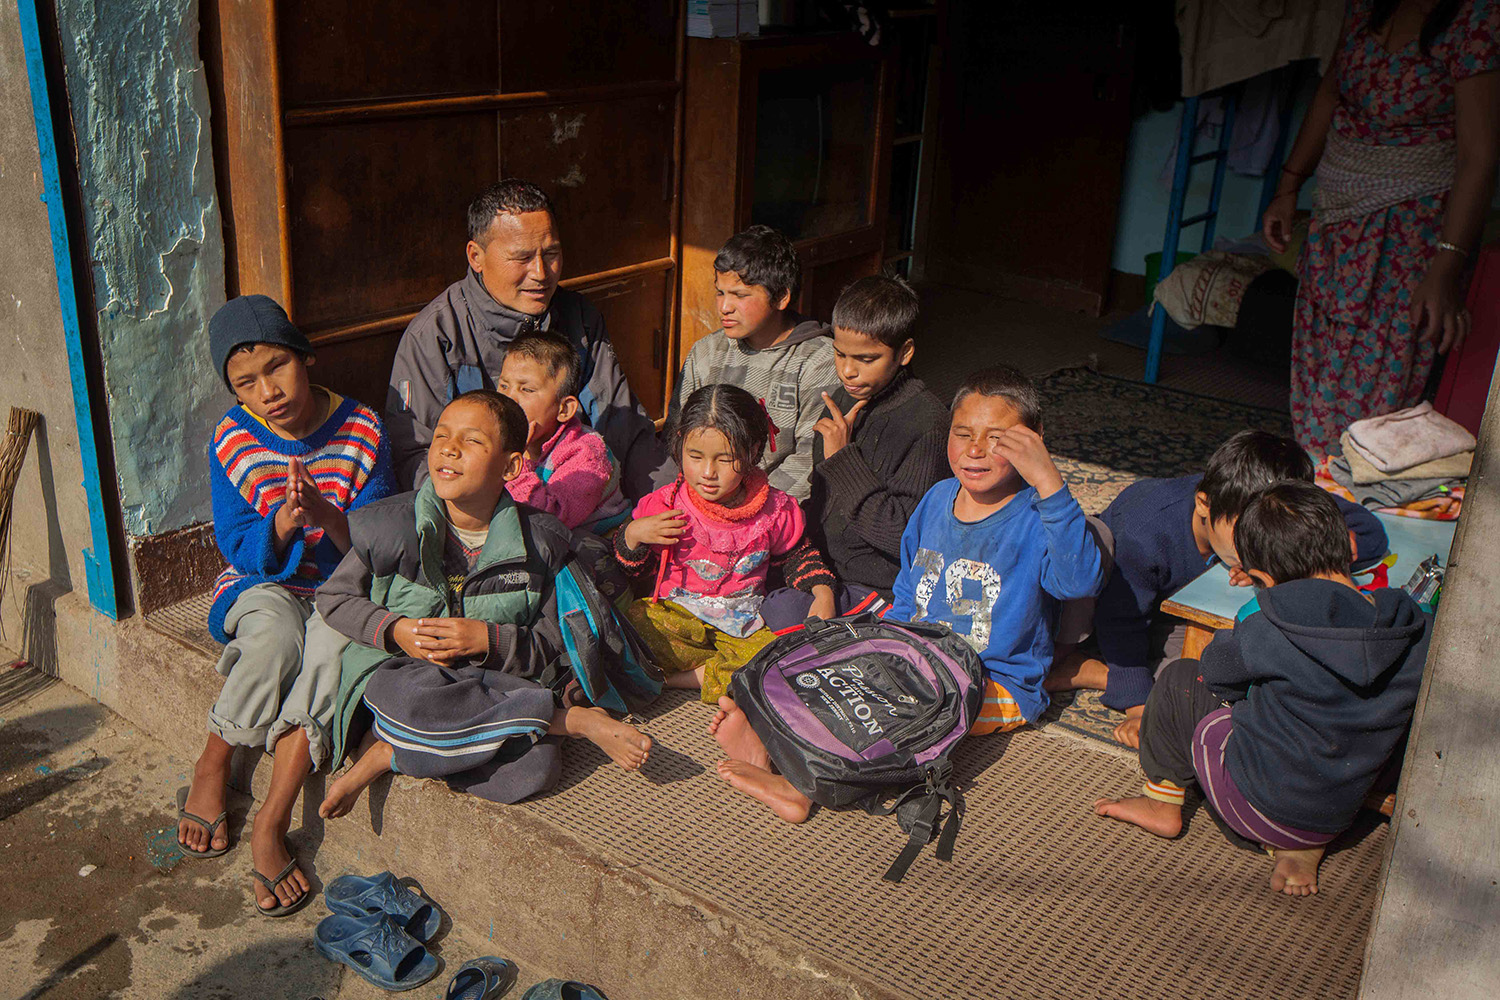 The children come from all over Nepal to the school in Bungmati village